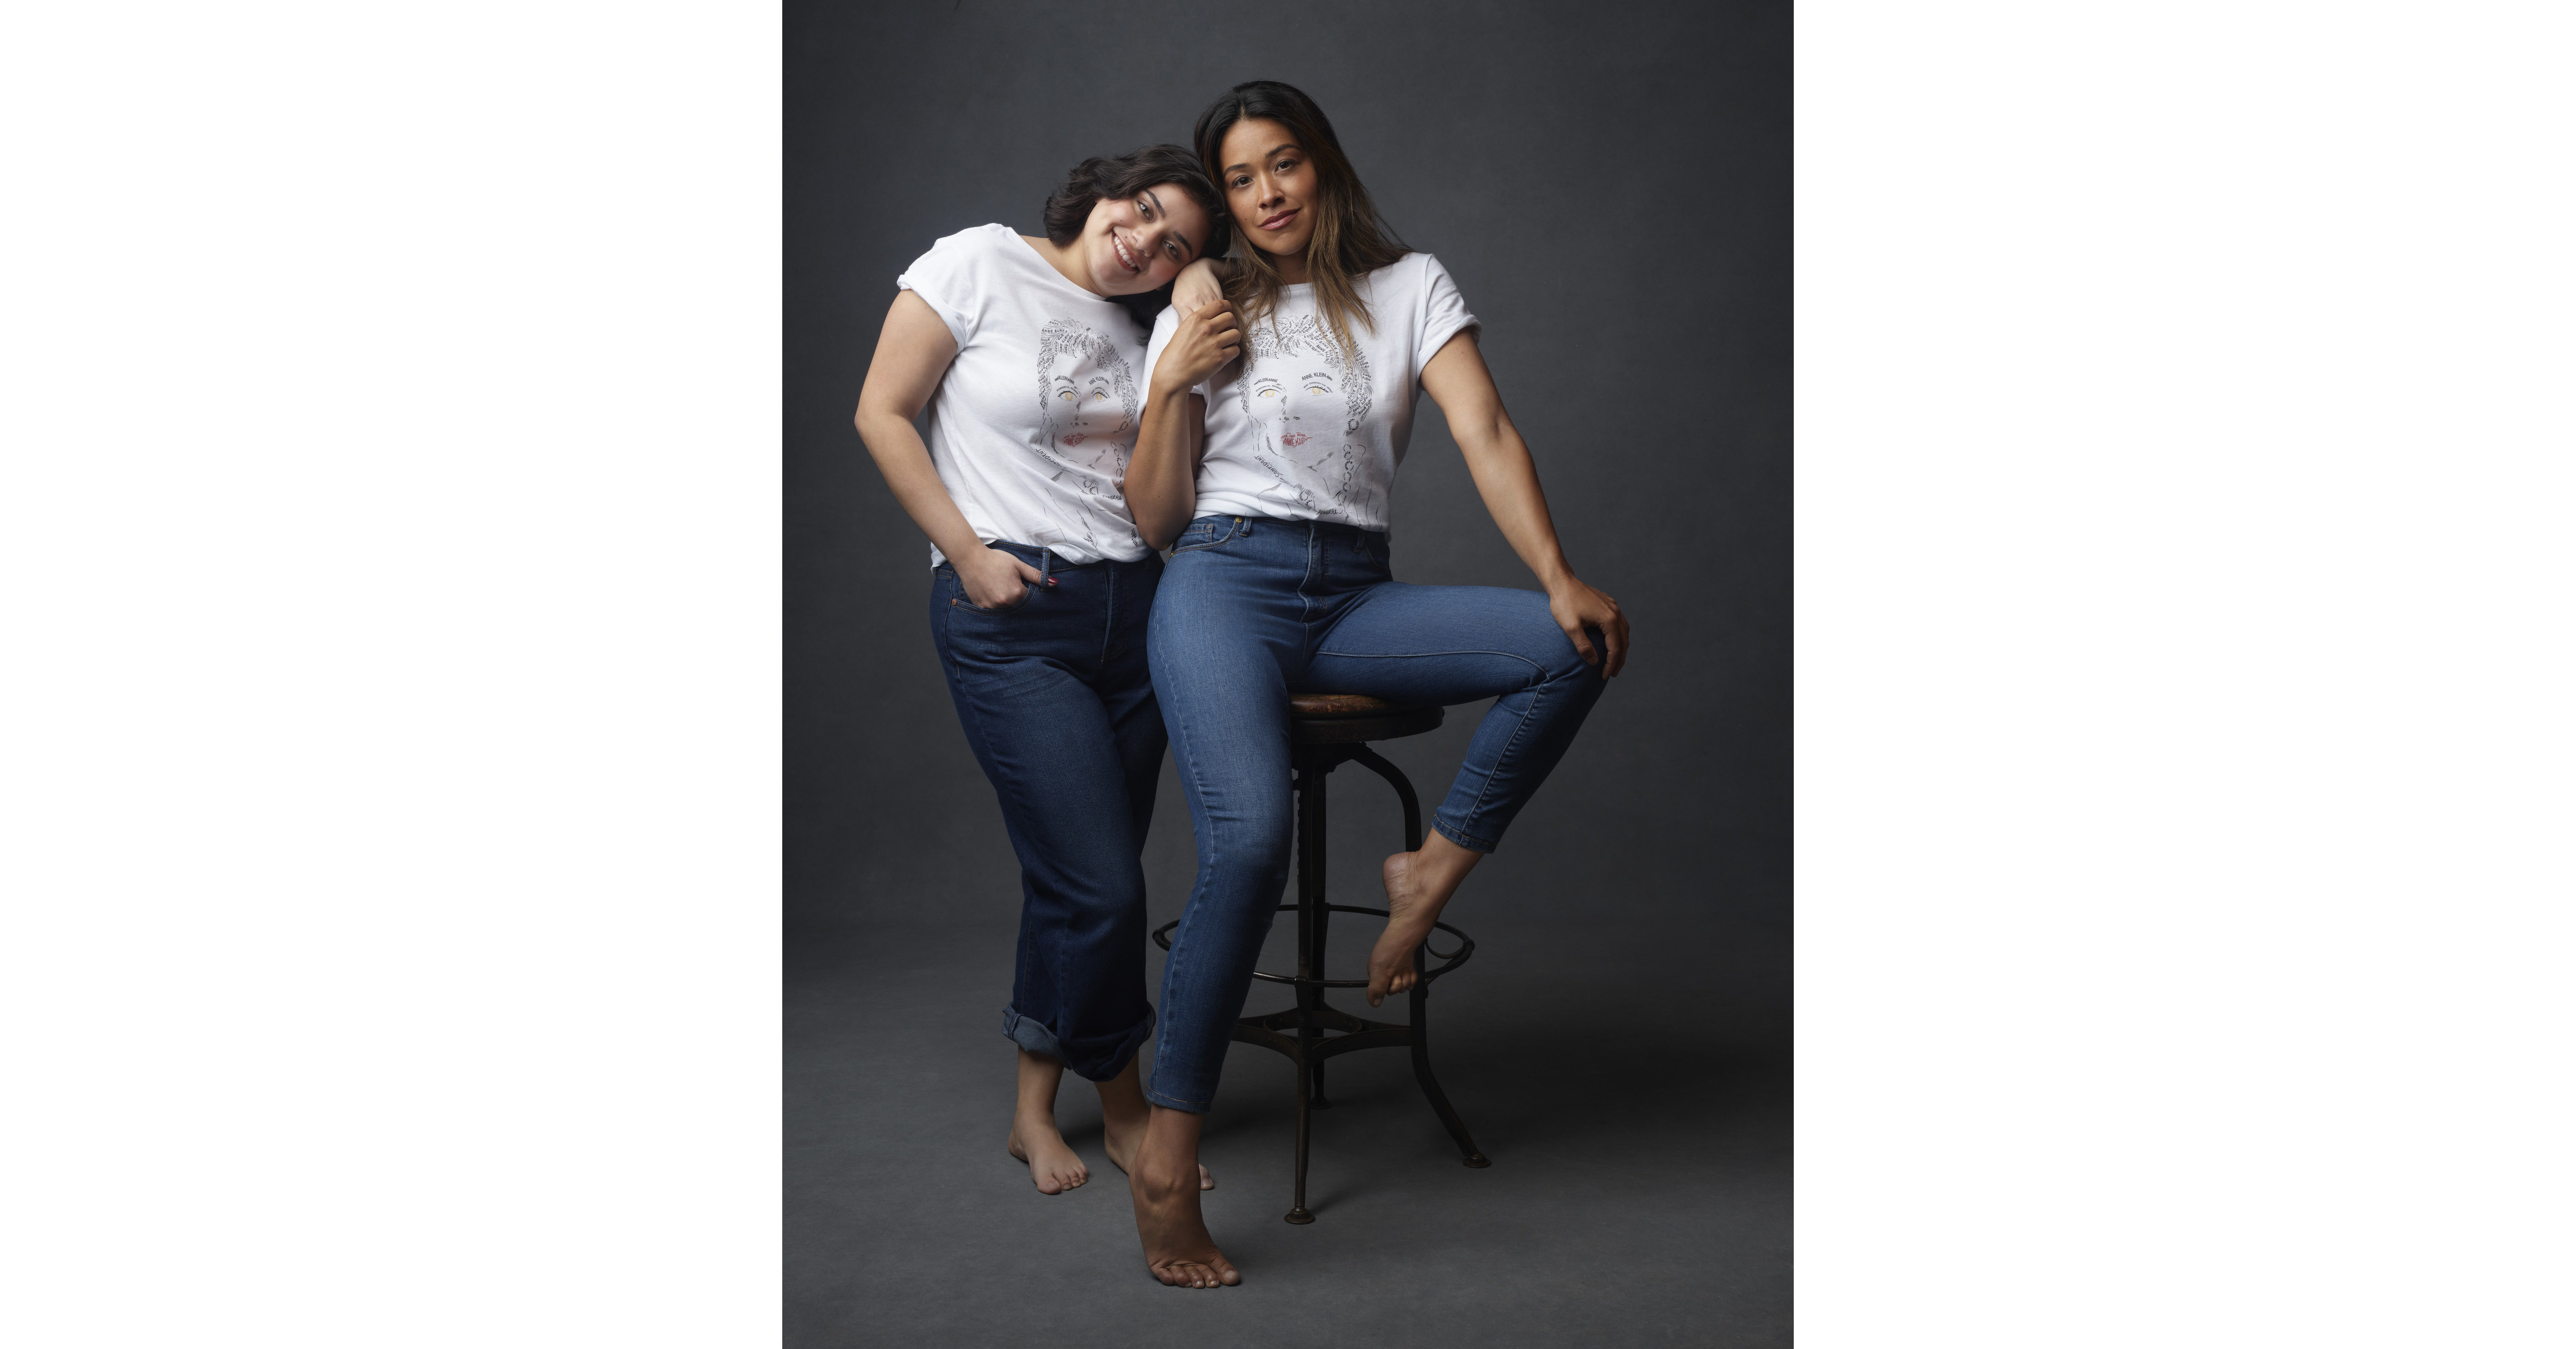 Anne Klein, Actress Gina Rodriguez and The Fashion Scholarship Fund (FSF)  Make Latina Students' Dreams a Reality During Hispanic Heritage Month